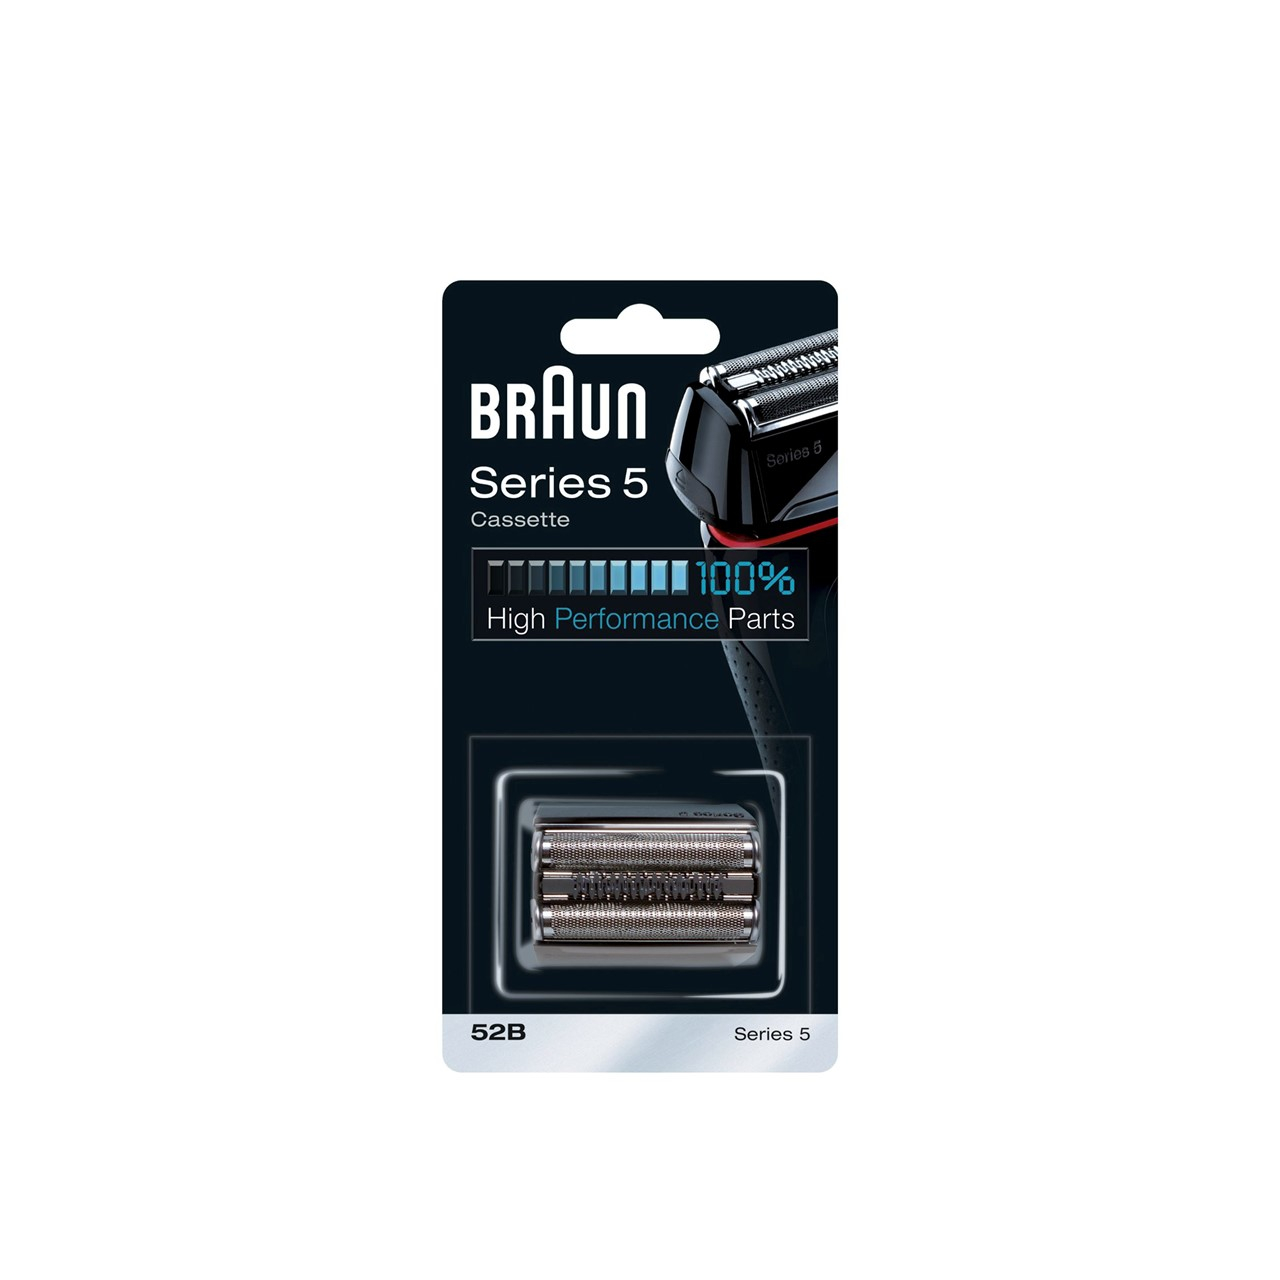 Braun Series 5 Electric Shaver Cassette Replacement 52B